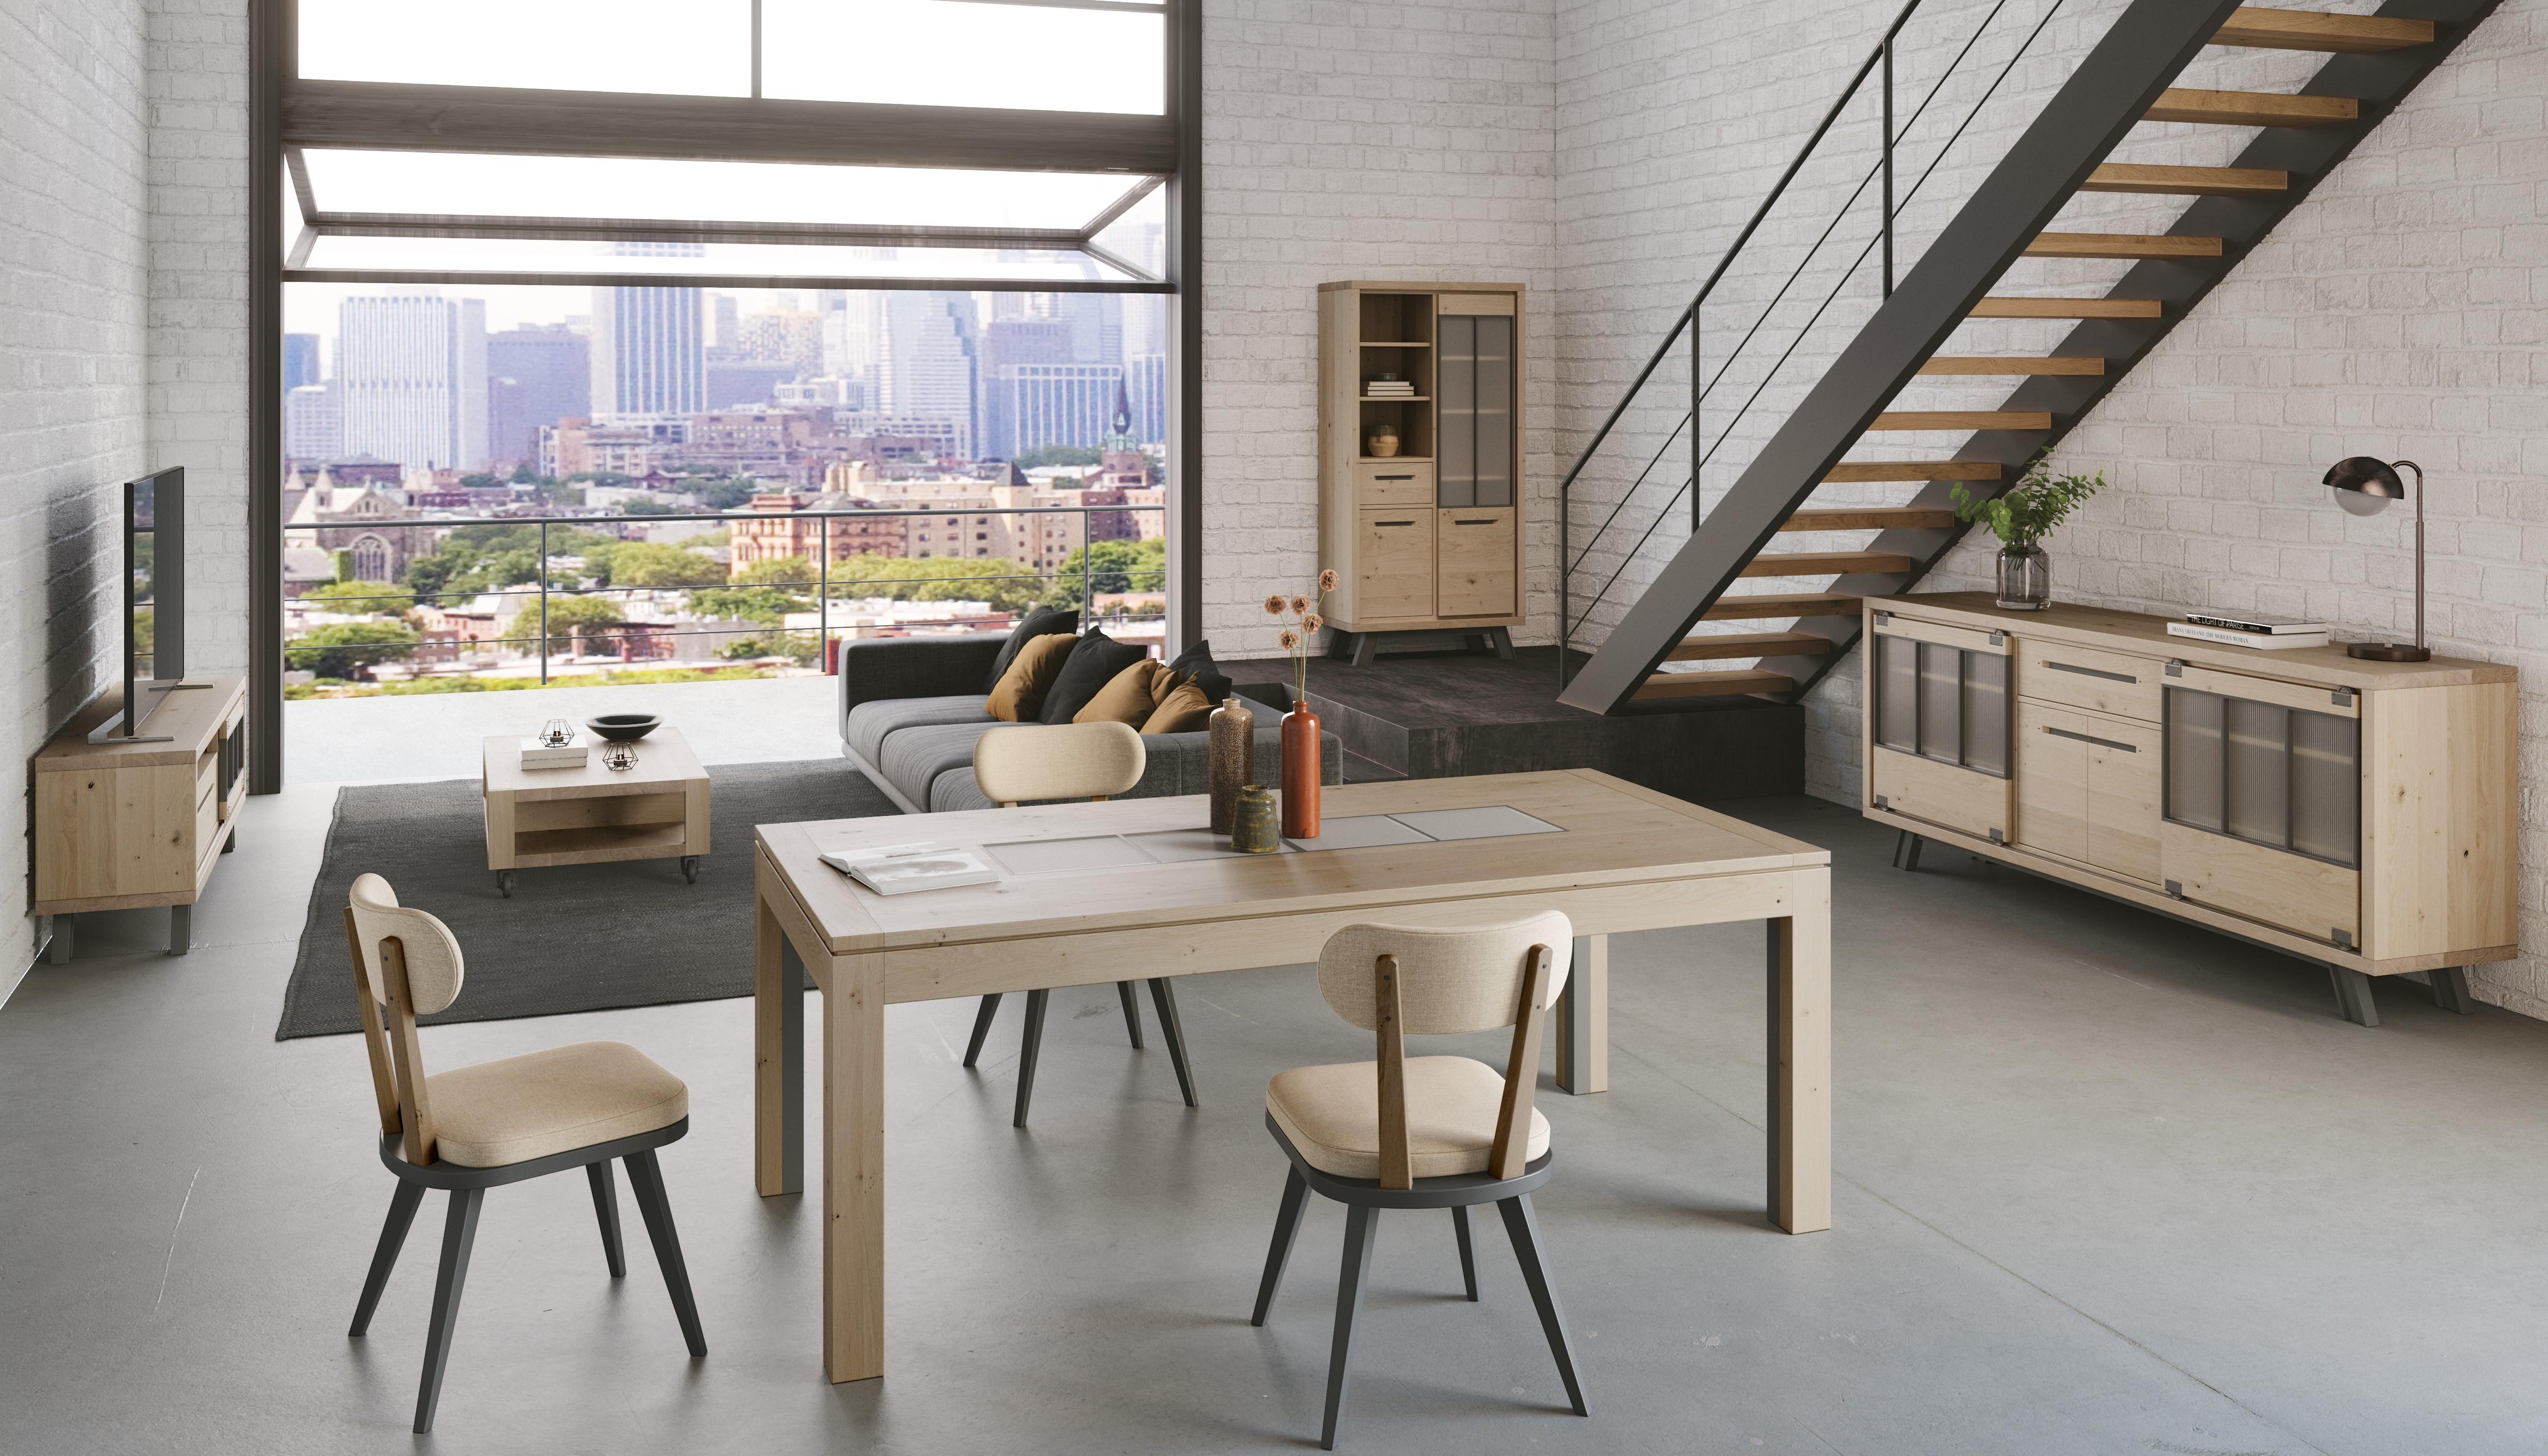 The ST James collection incorporates glass and metel details in its furniture pieces that give them a sober and industrial look without compromising their versatility. Measure: 143cm.

Produced by Cacio with more than 70 years of know how, this